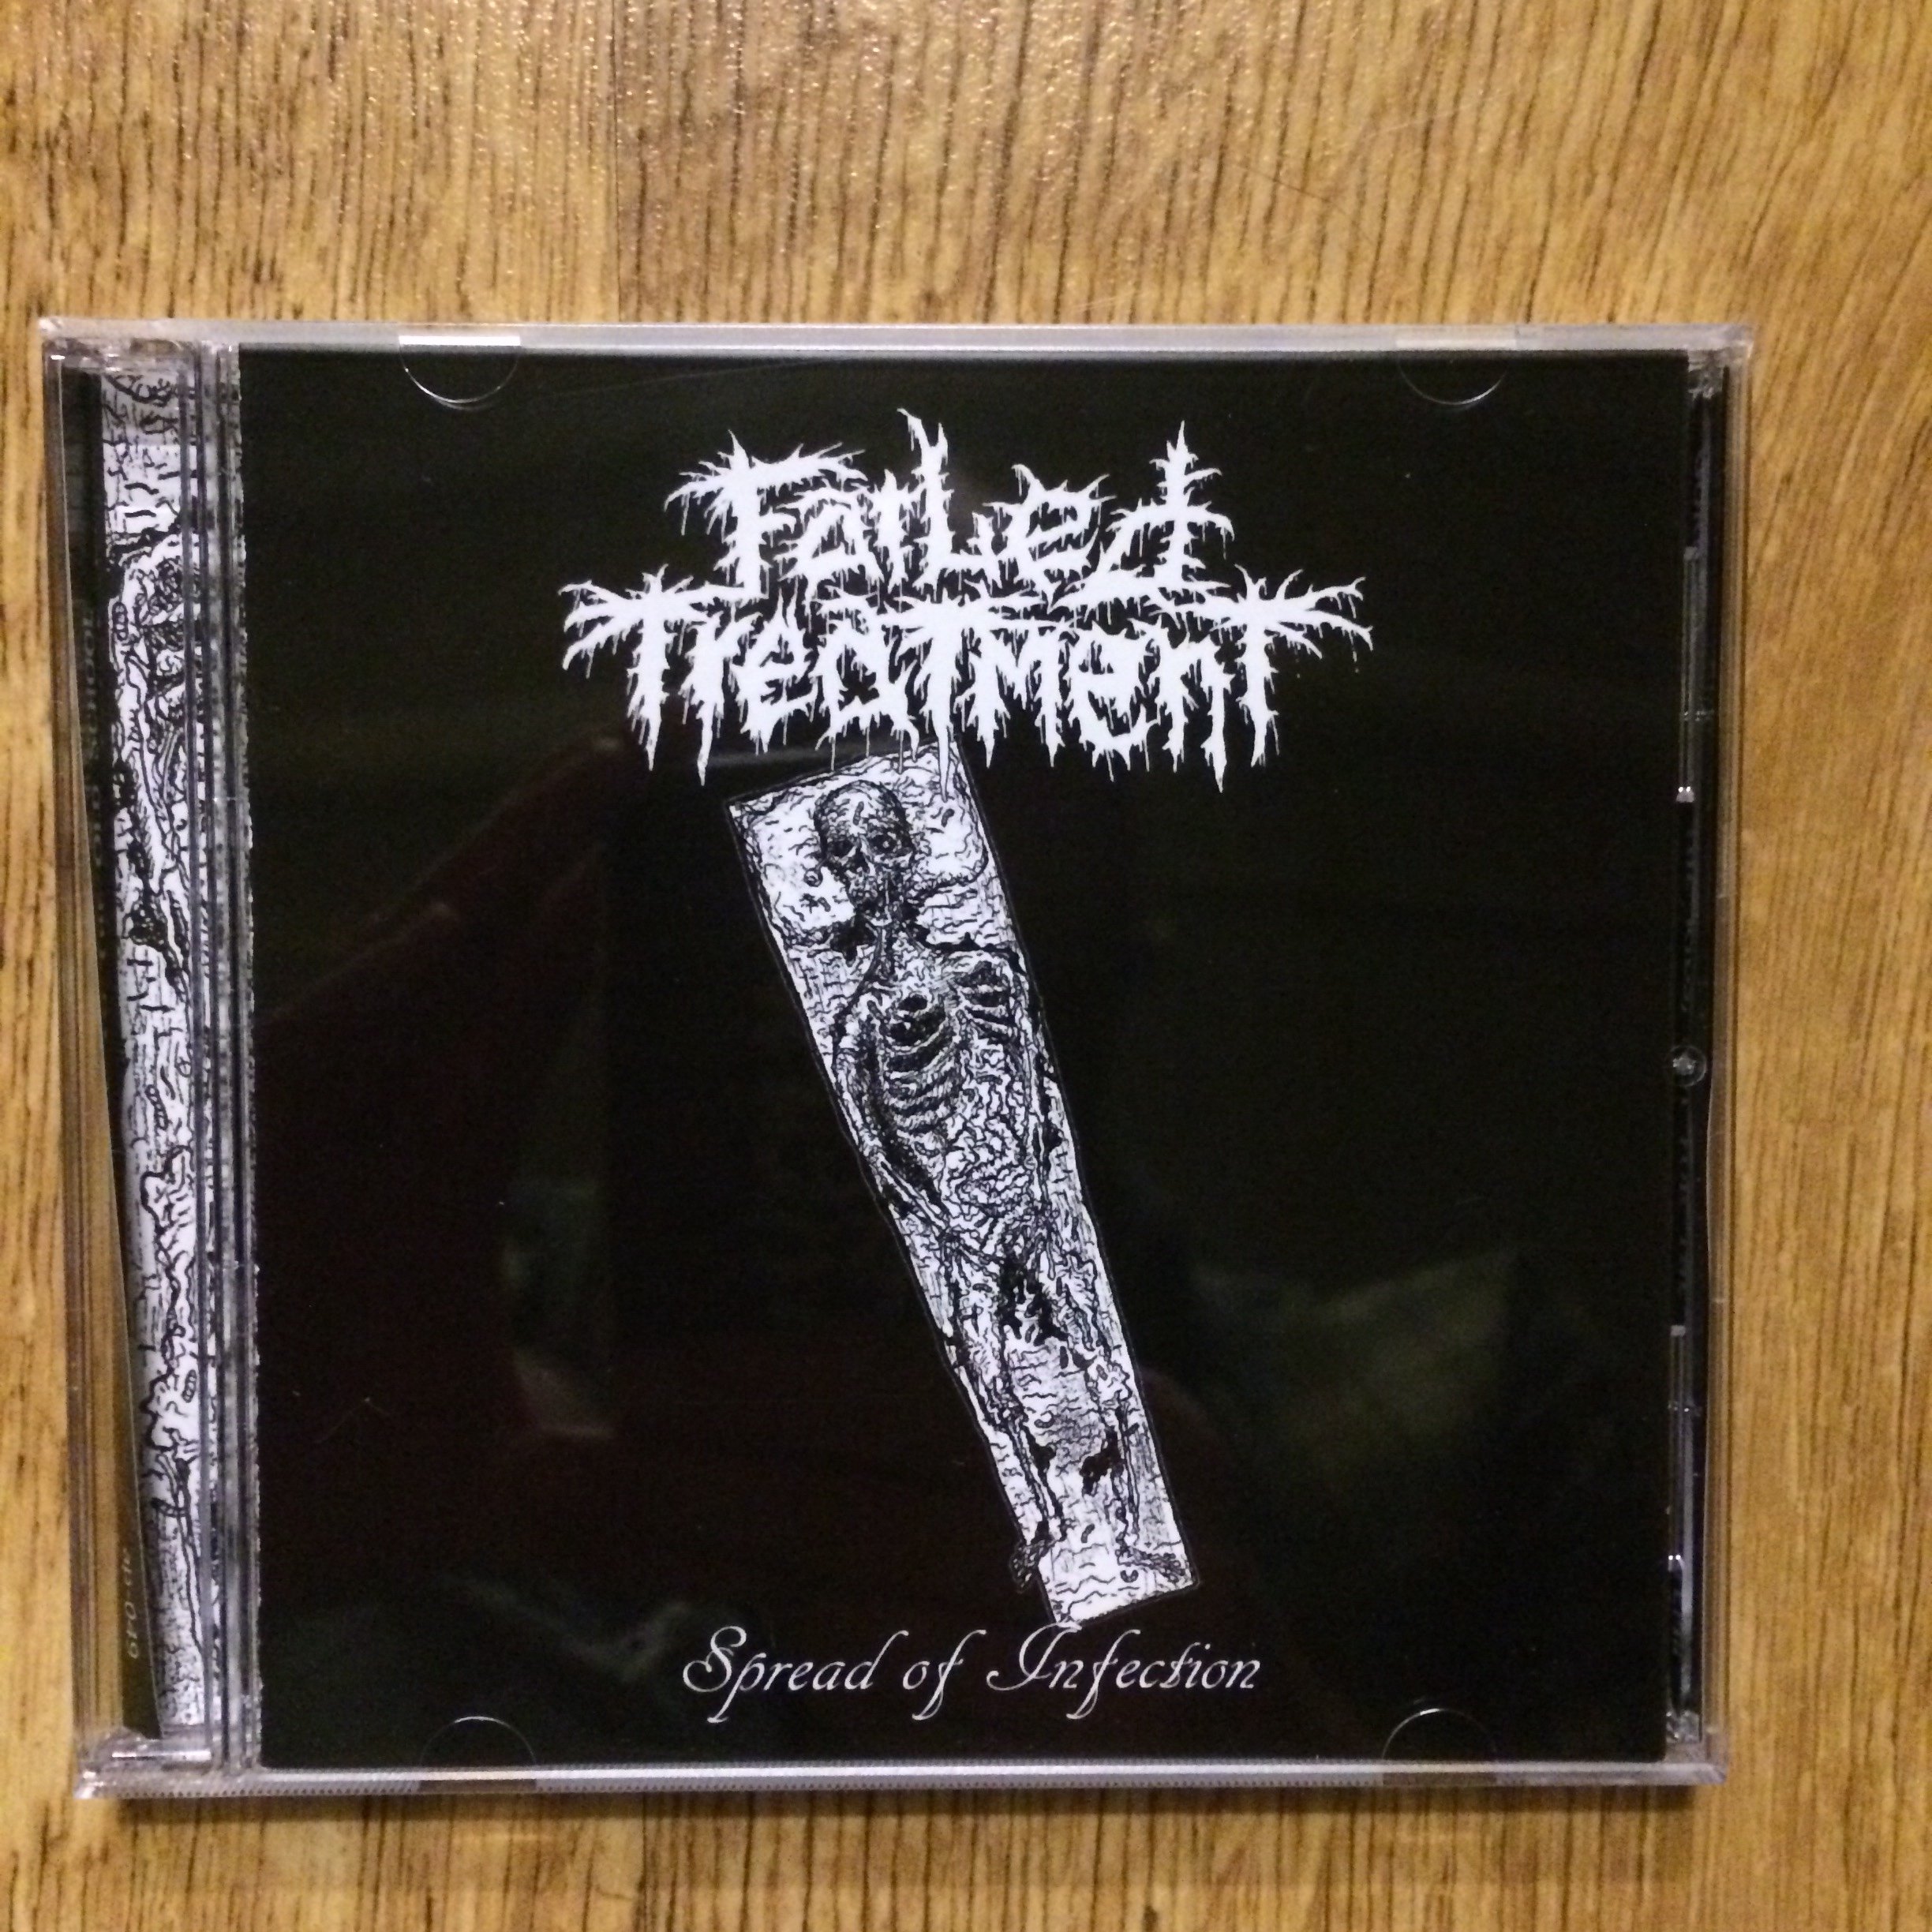 Photo of the Failed Treatment - "Spread of Infection" CD